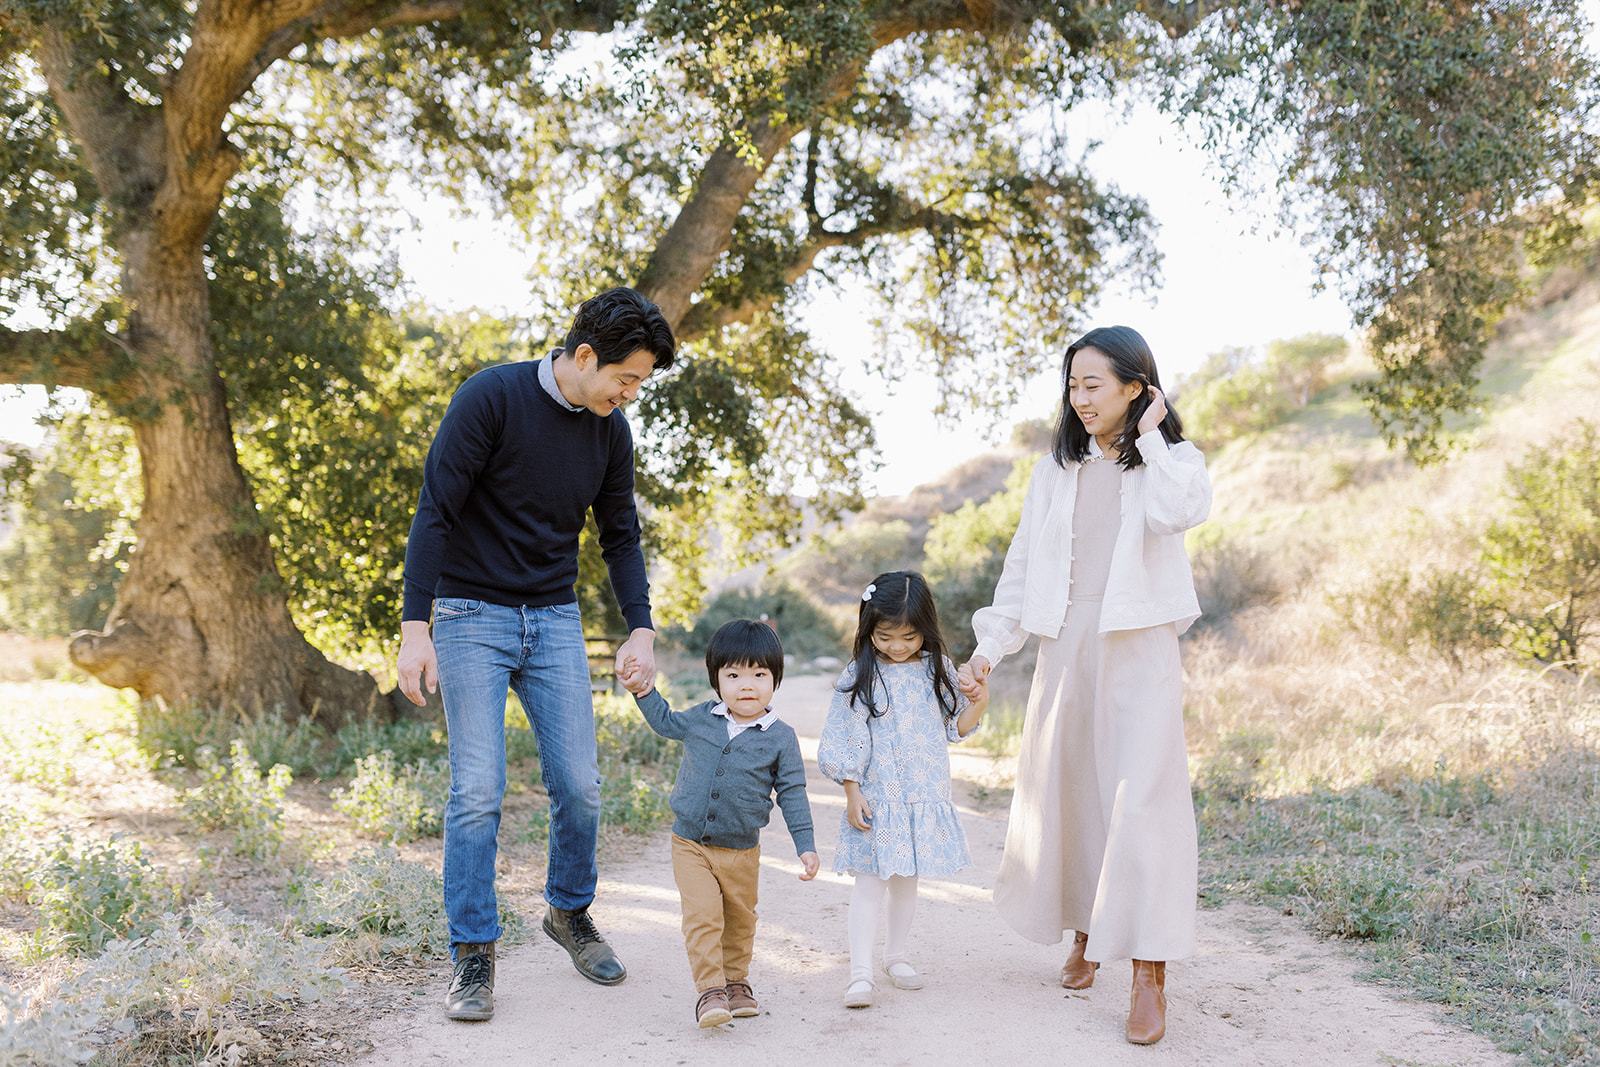 Family with two young children walking down a dirt path with a large oak tree behind them.